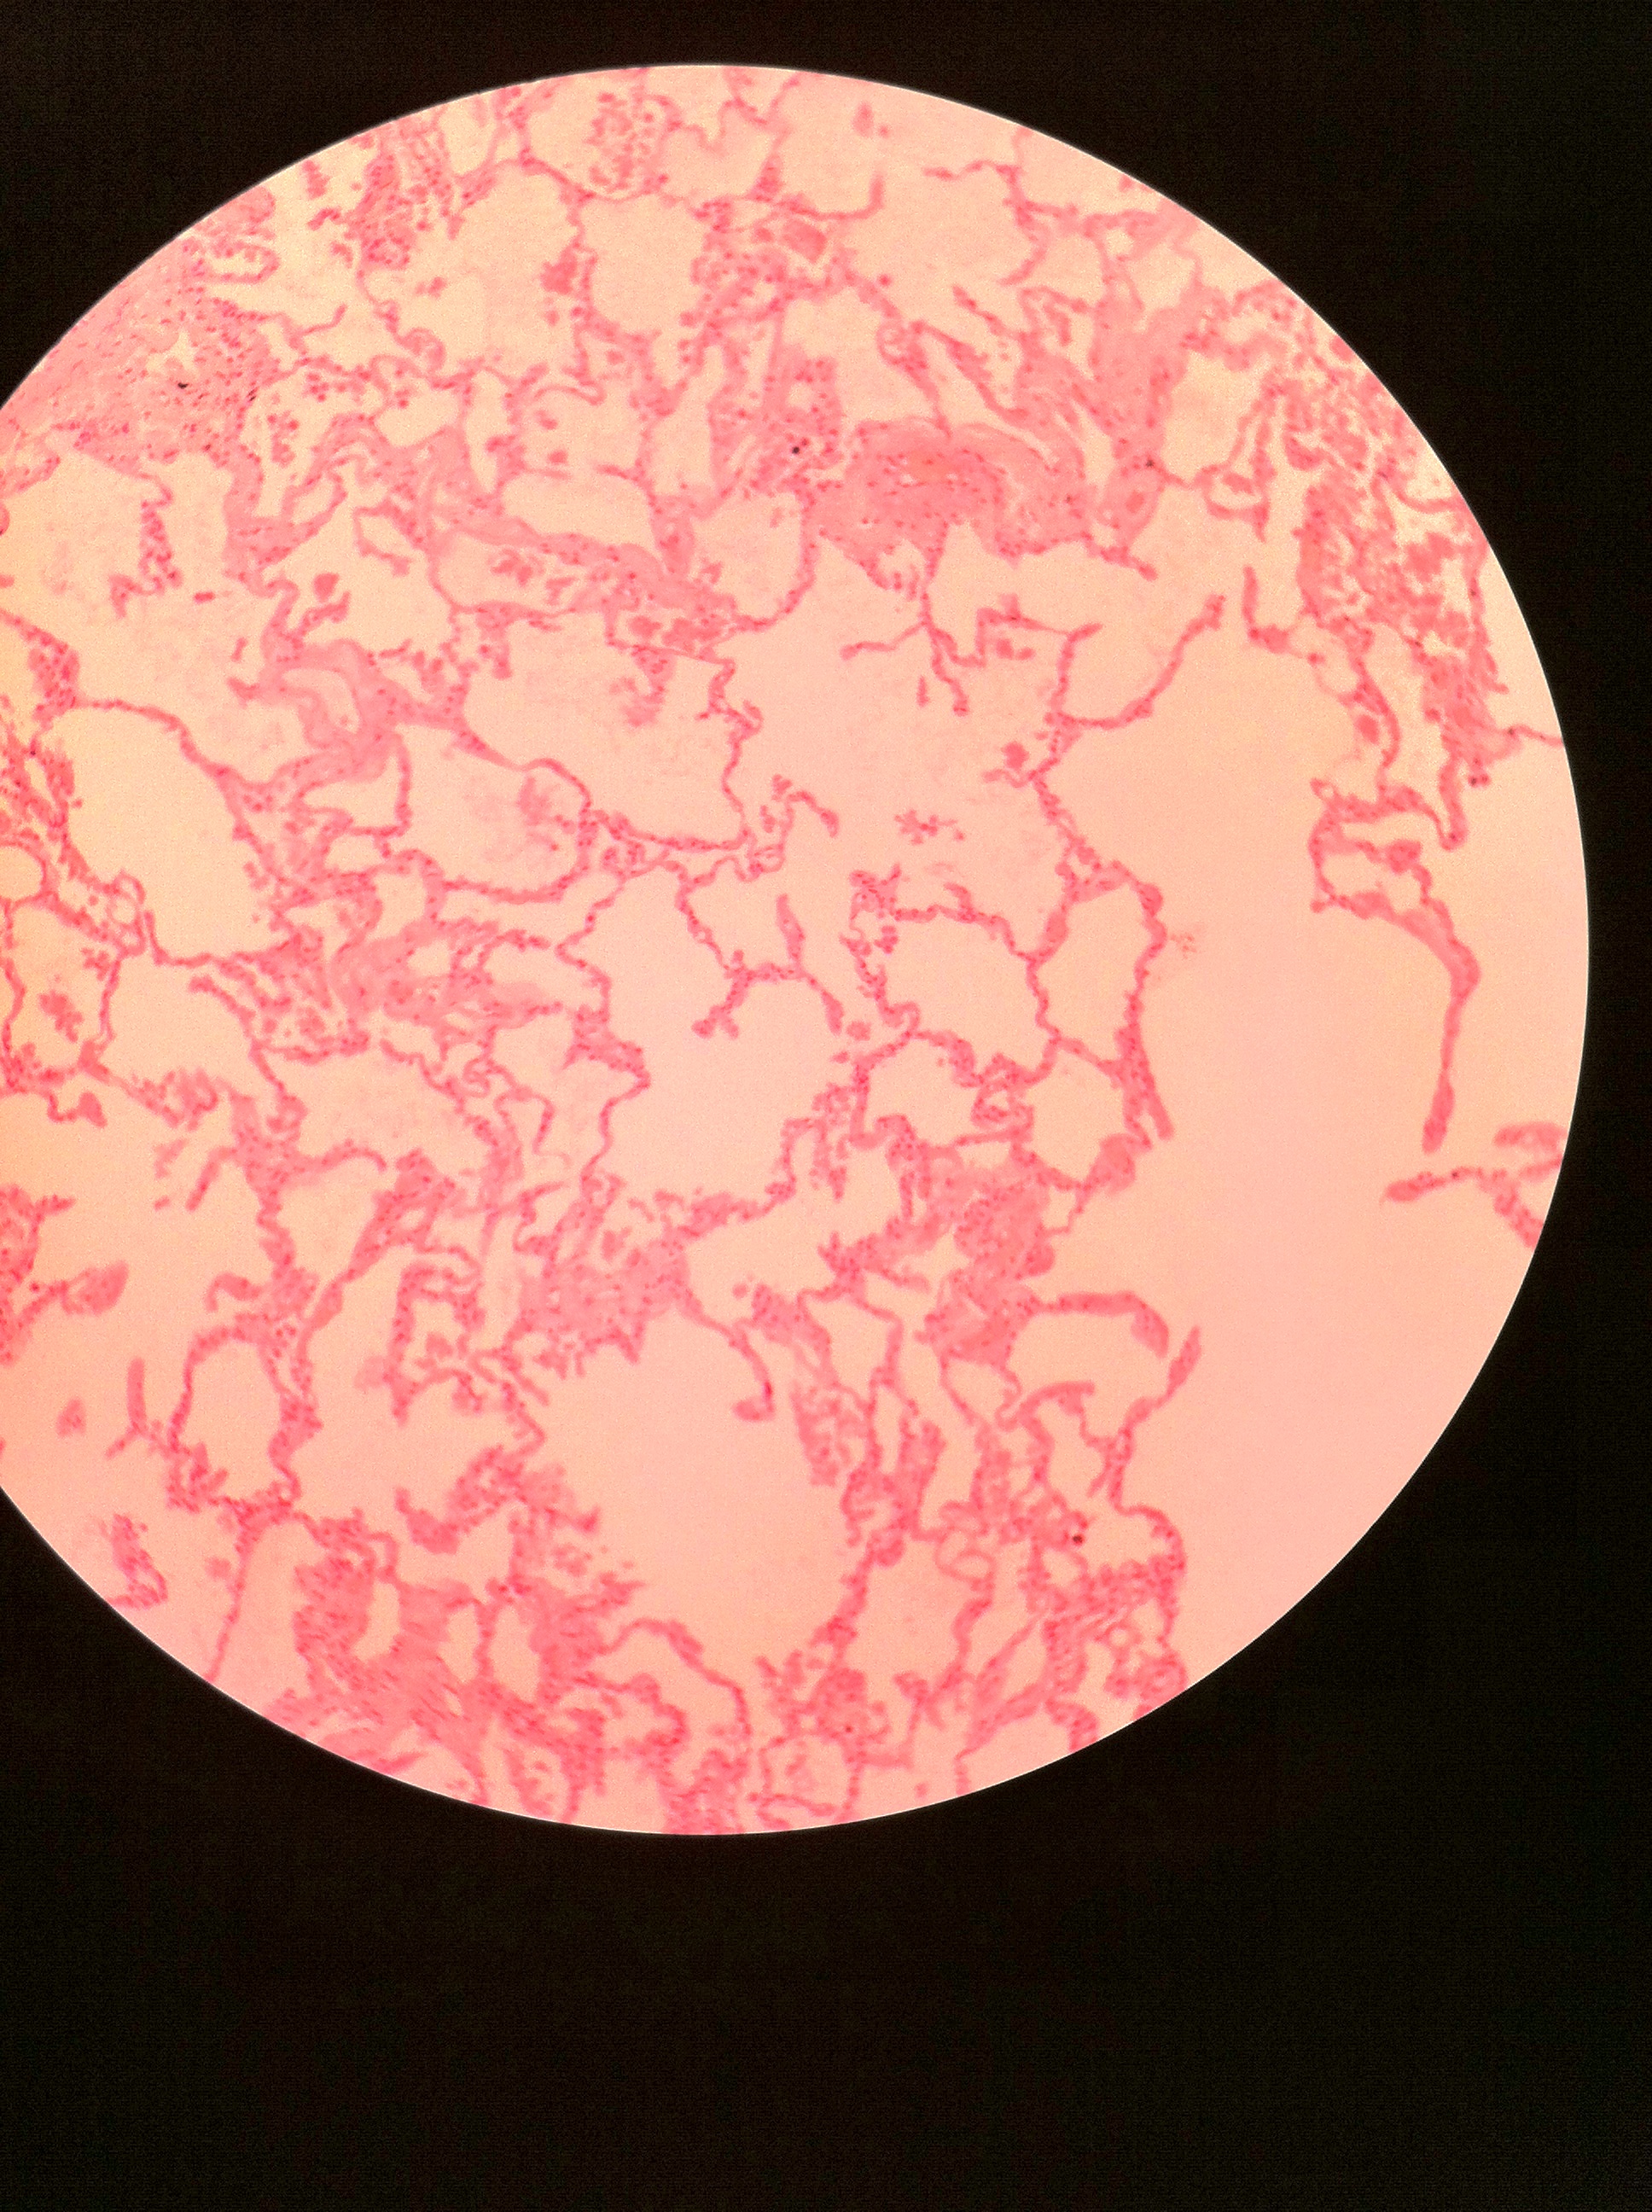 simple squamous (lung) total mag:100X